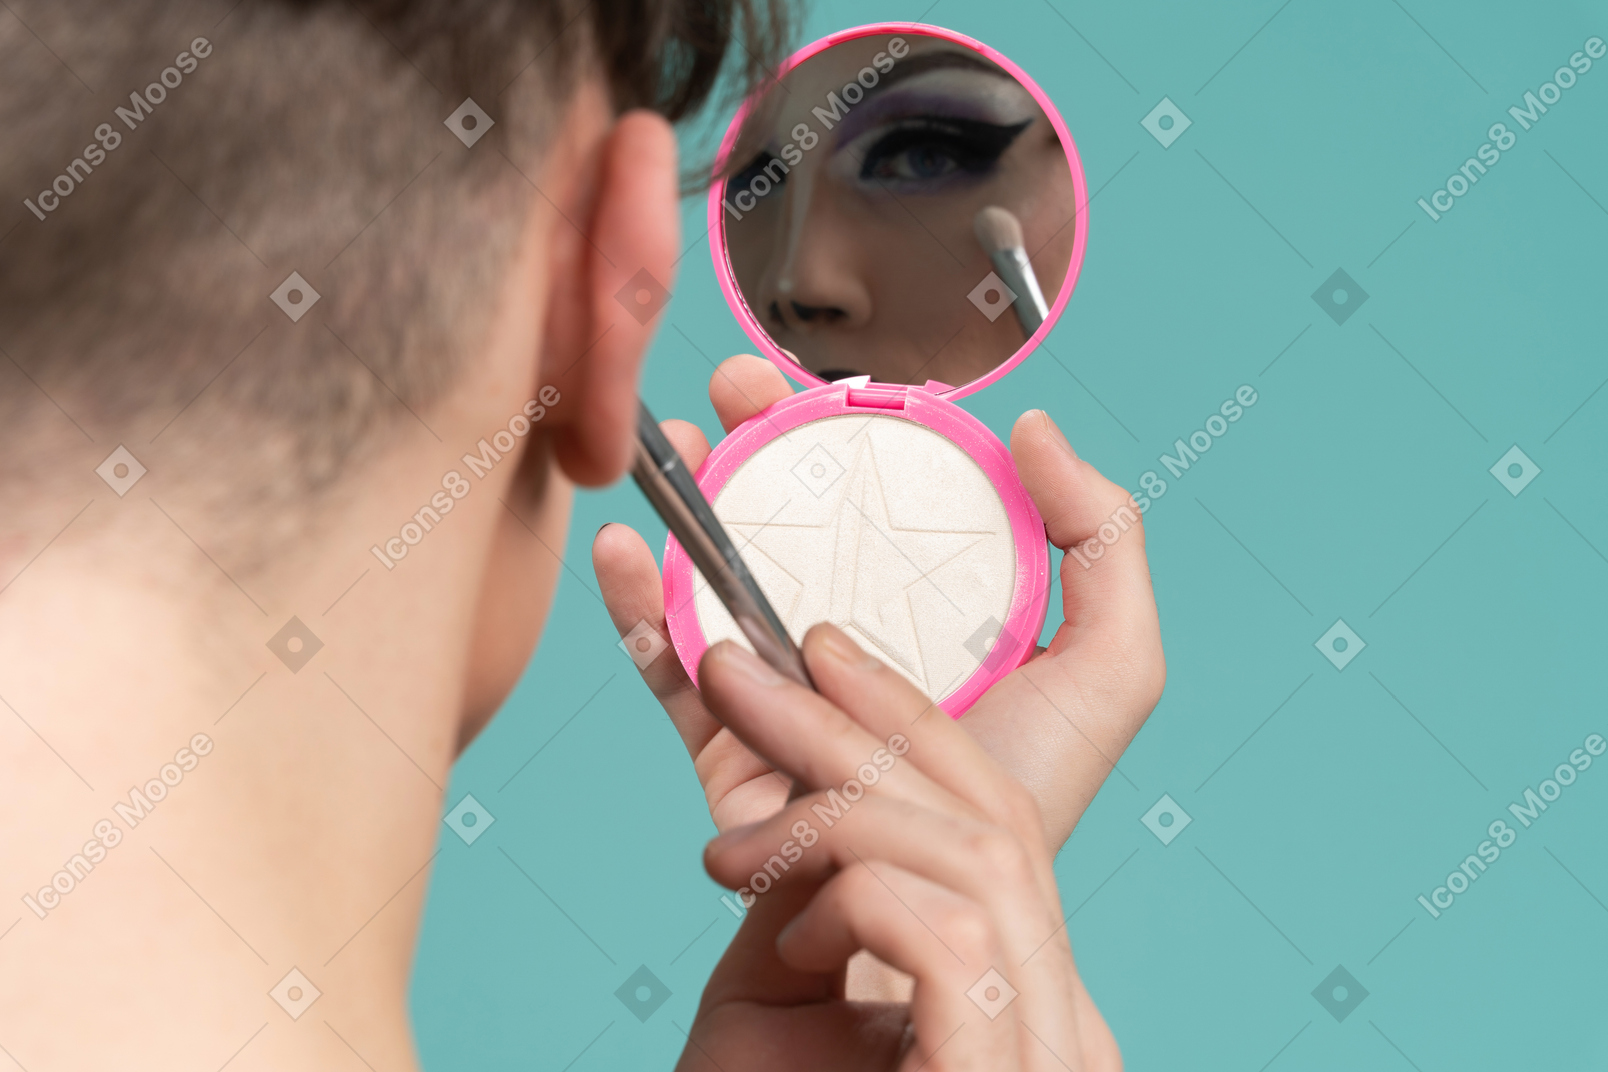 Back view of a person putting on eyeshadow